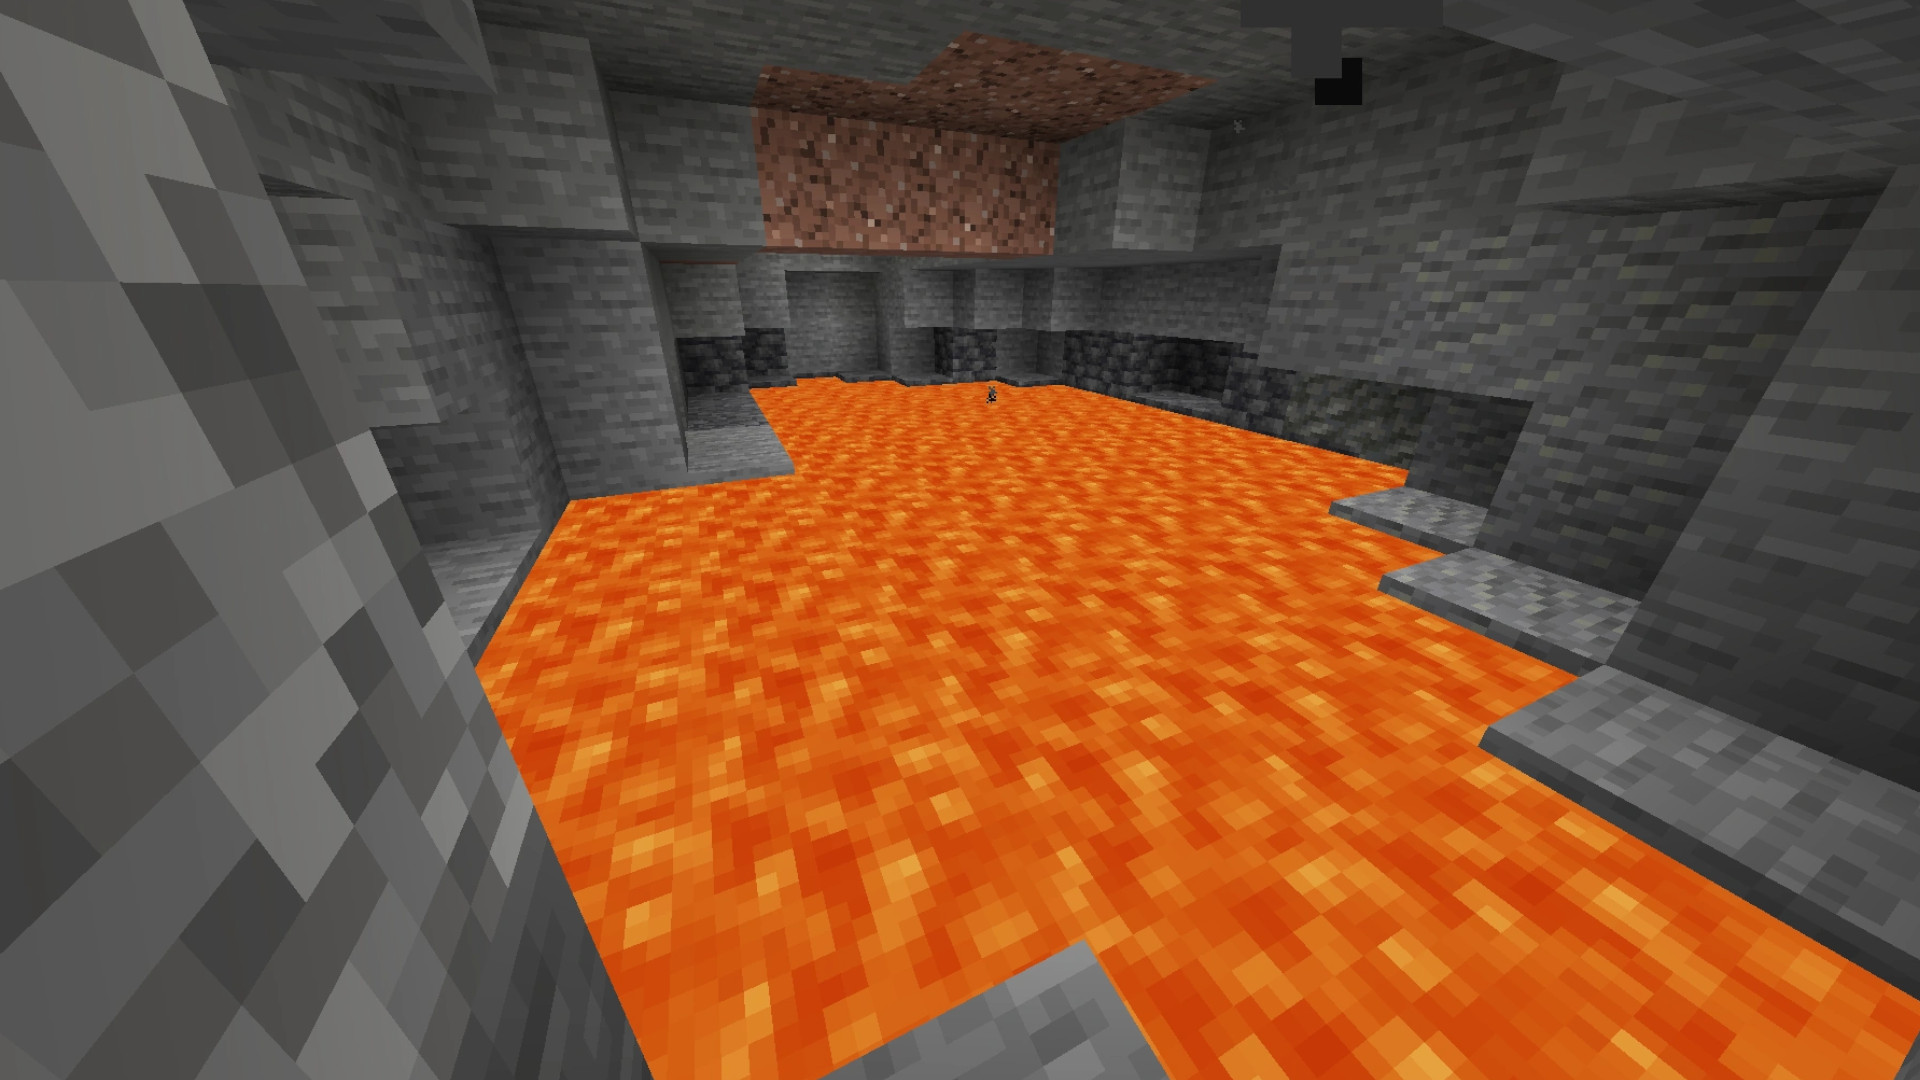 You can make silent, deadly Minecraft lava traps with string